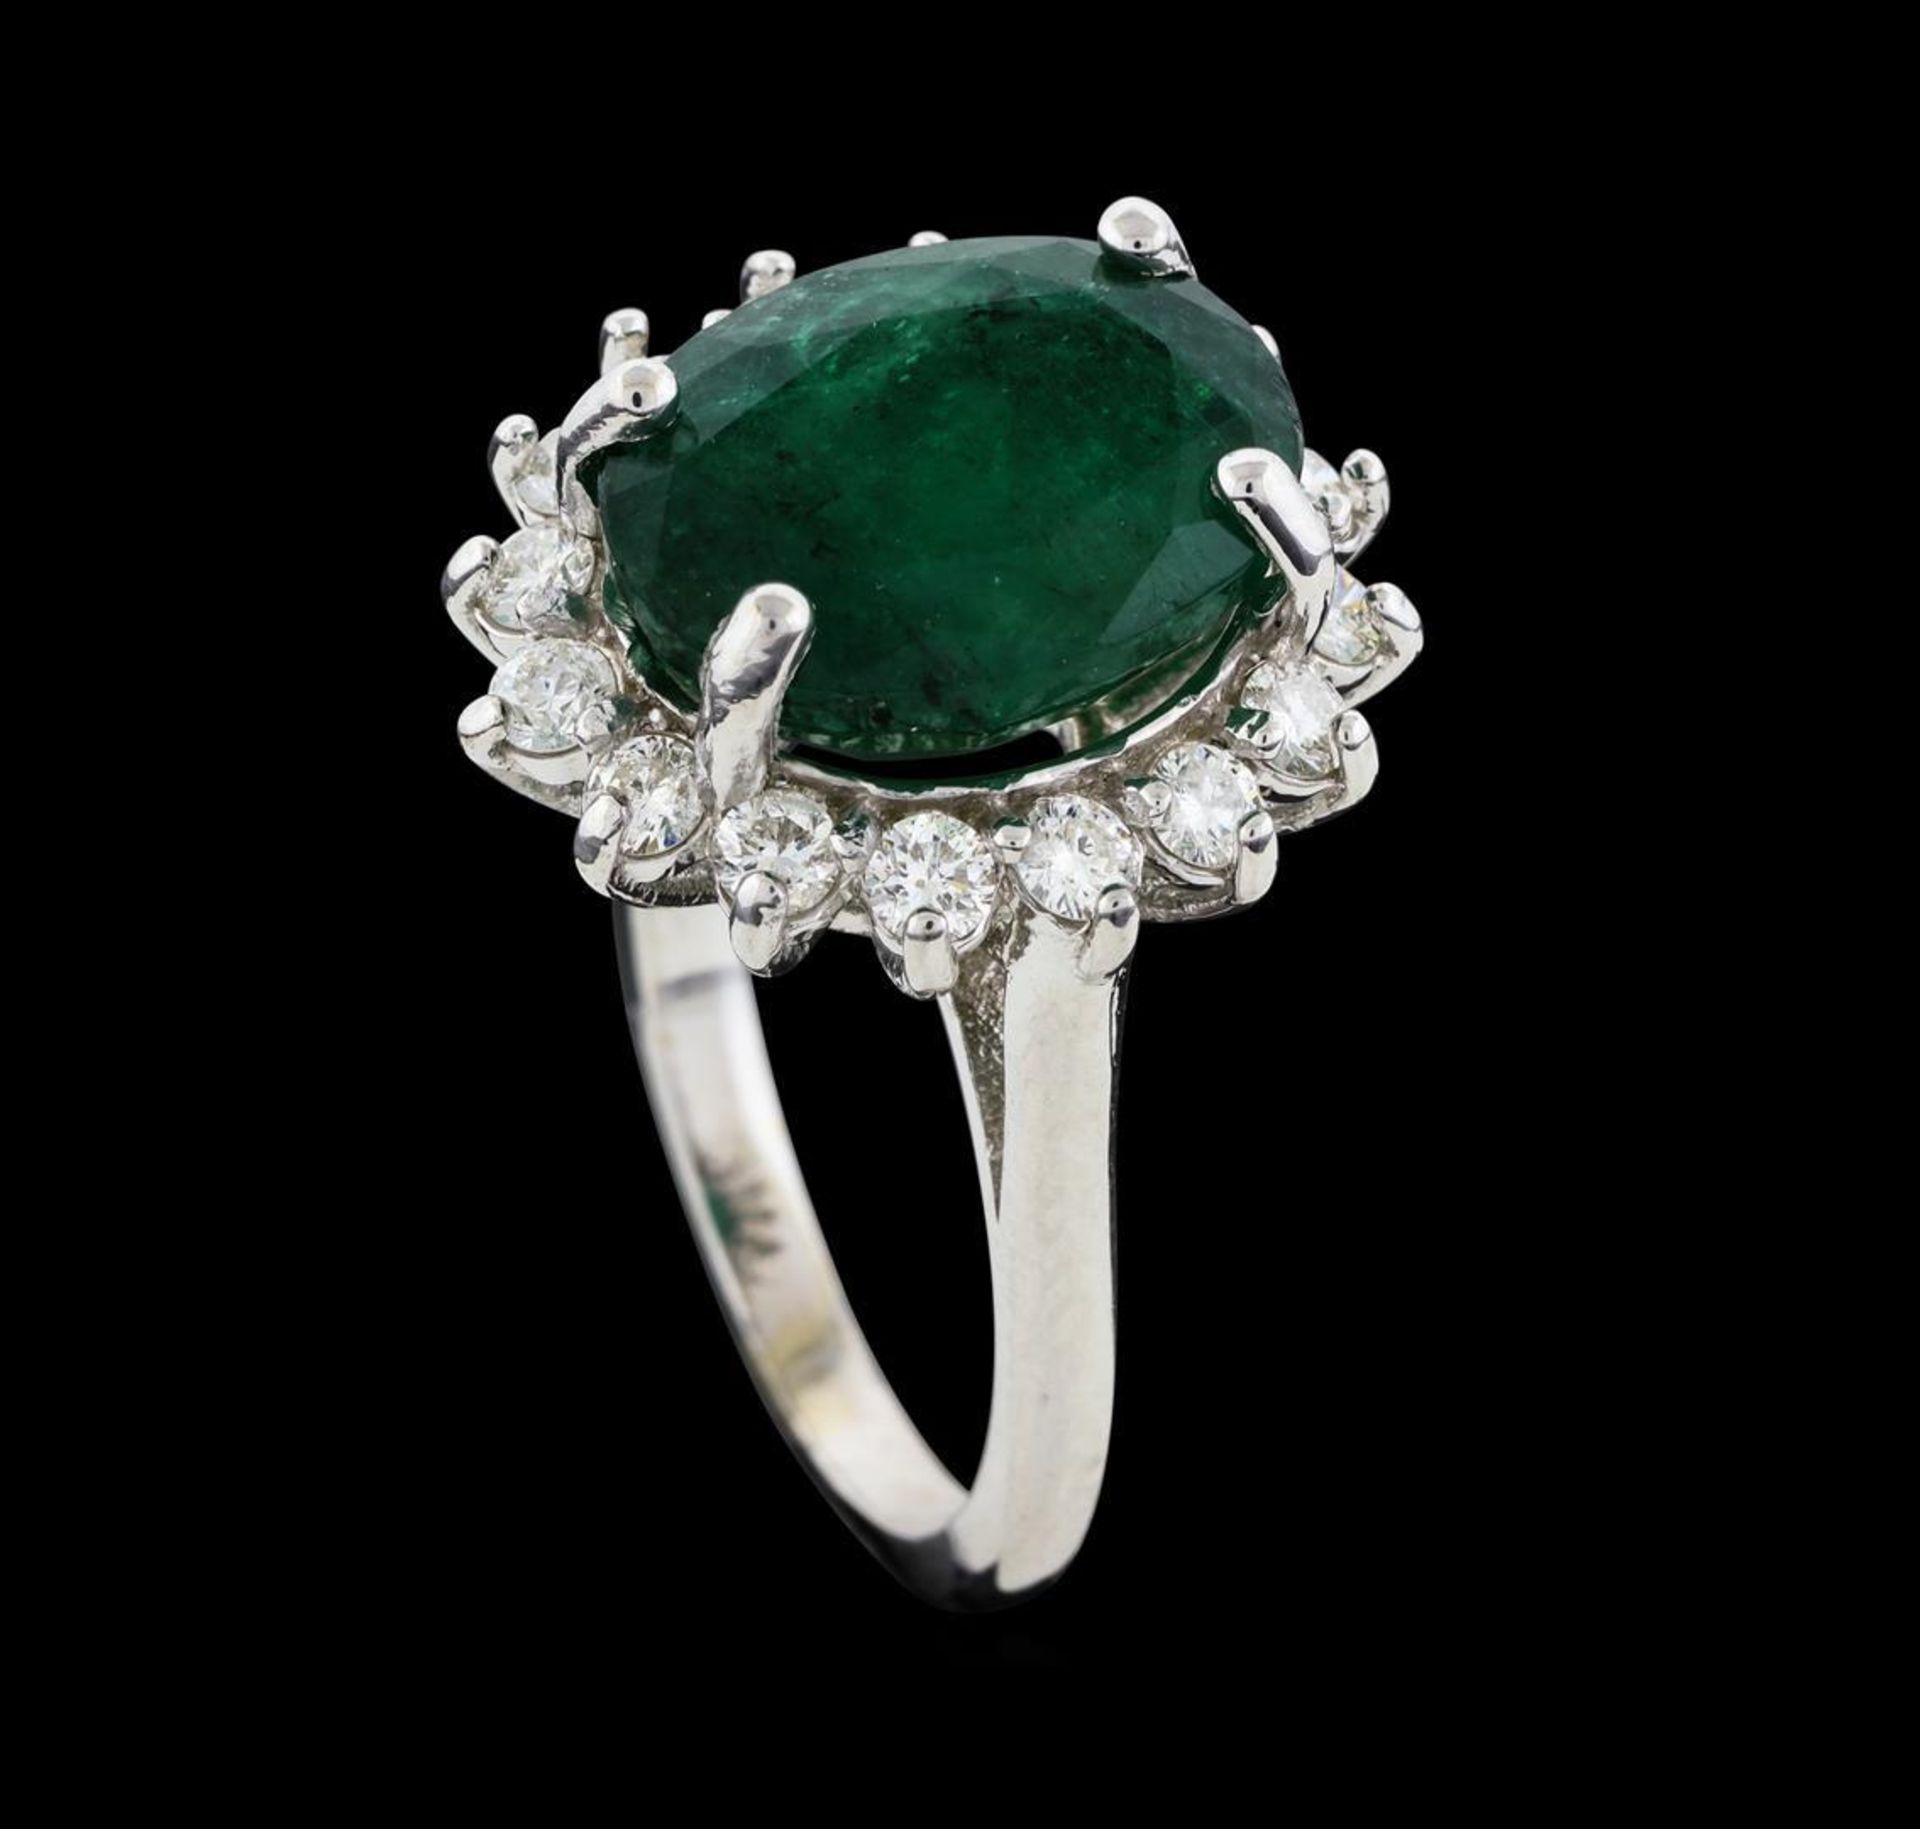 6.51 ctw Emerald and Diamond Ring - 14KT White Gold - Image 4 of 5